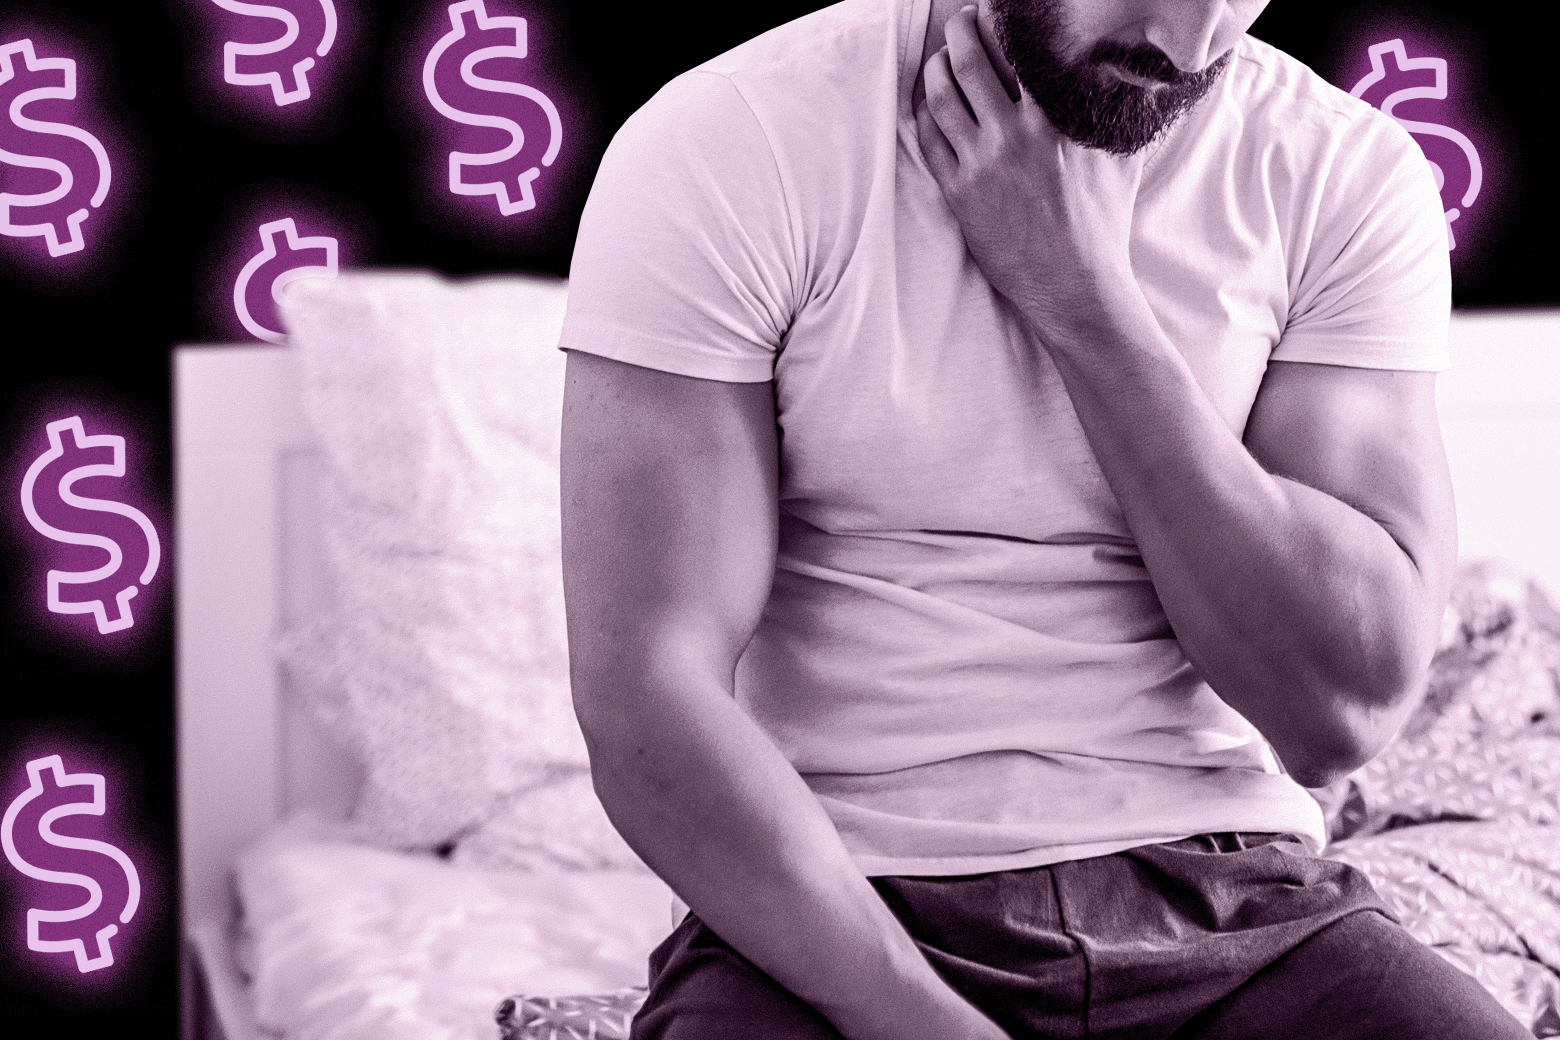 Is it unhealthy to pay your friends for sex? Because I just did. pic